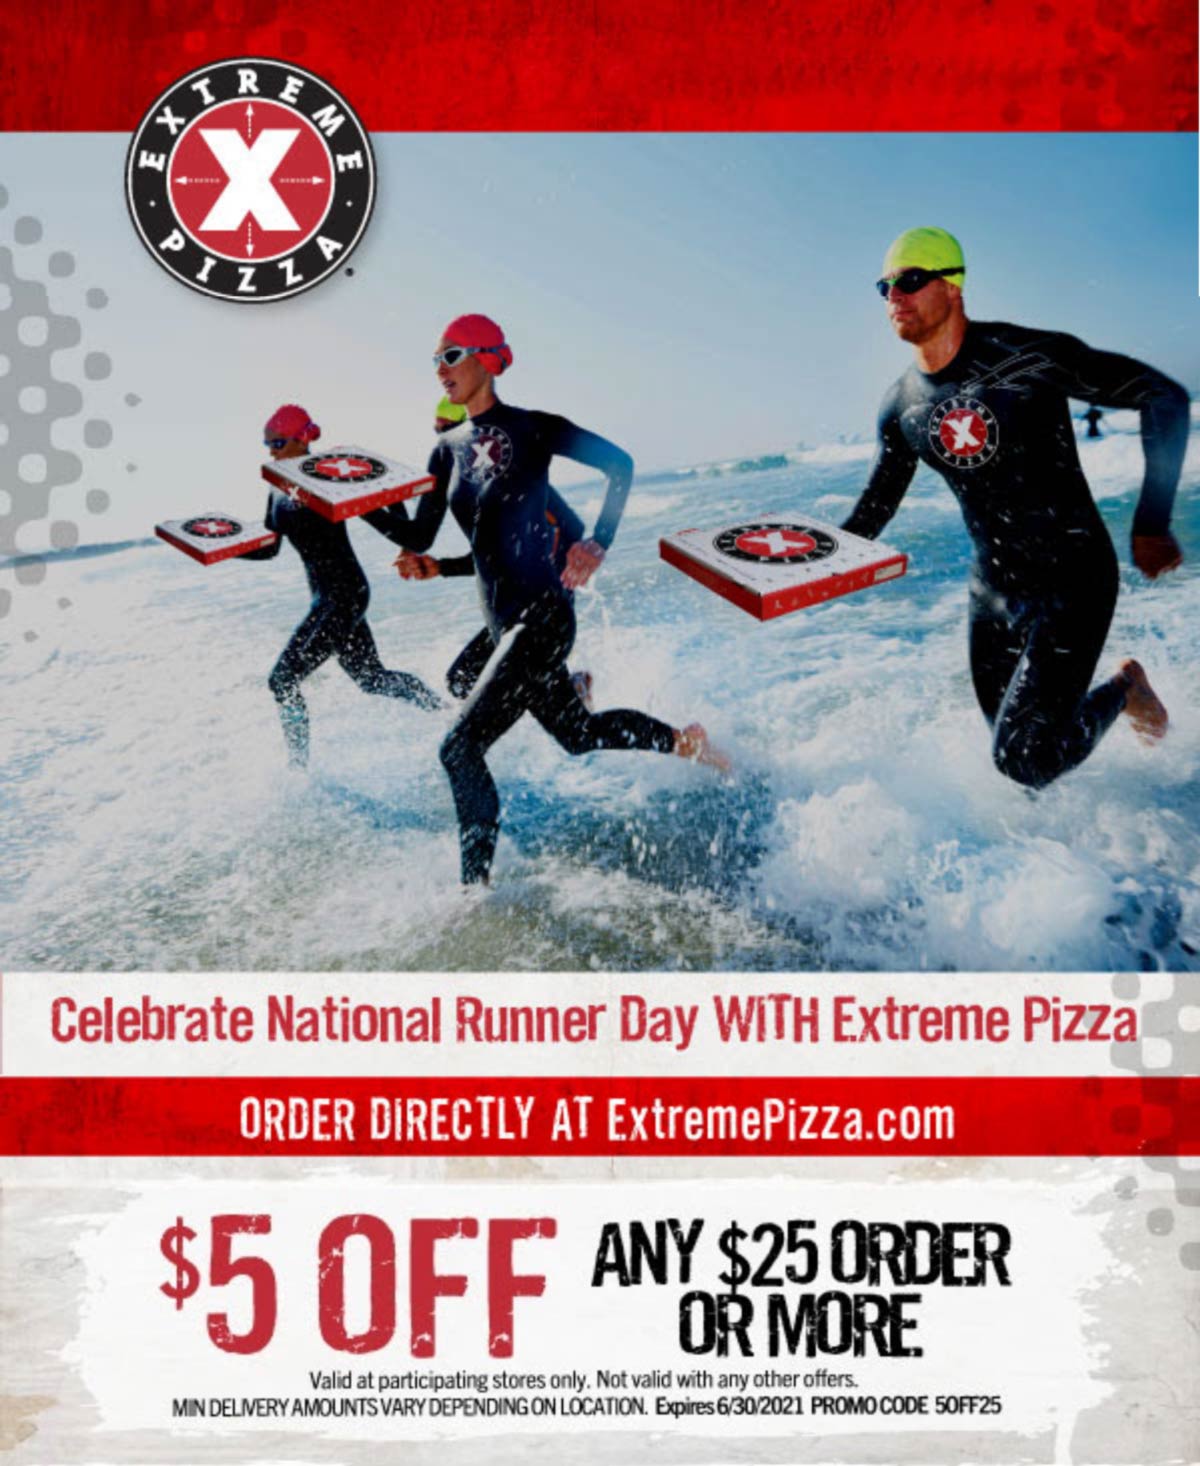 Extreme Pizza restaurants Coupon  $5 off $25 at Extreme Pizza via promo code 5OFF25 #extremepizza 